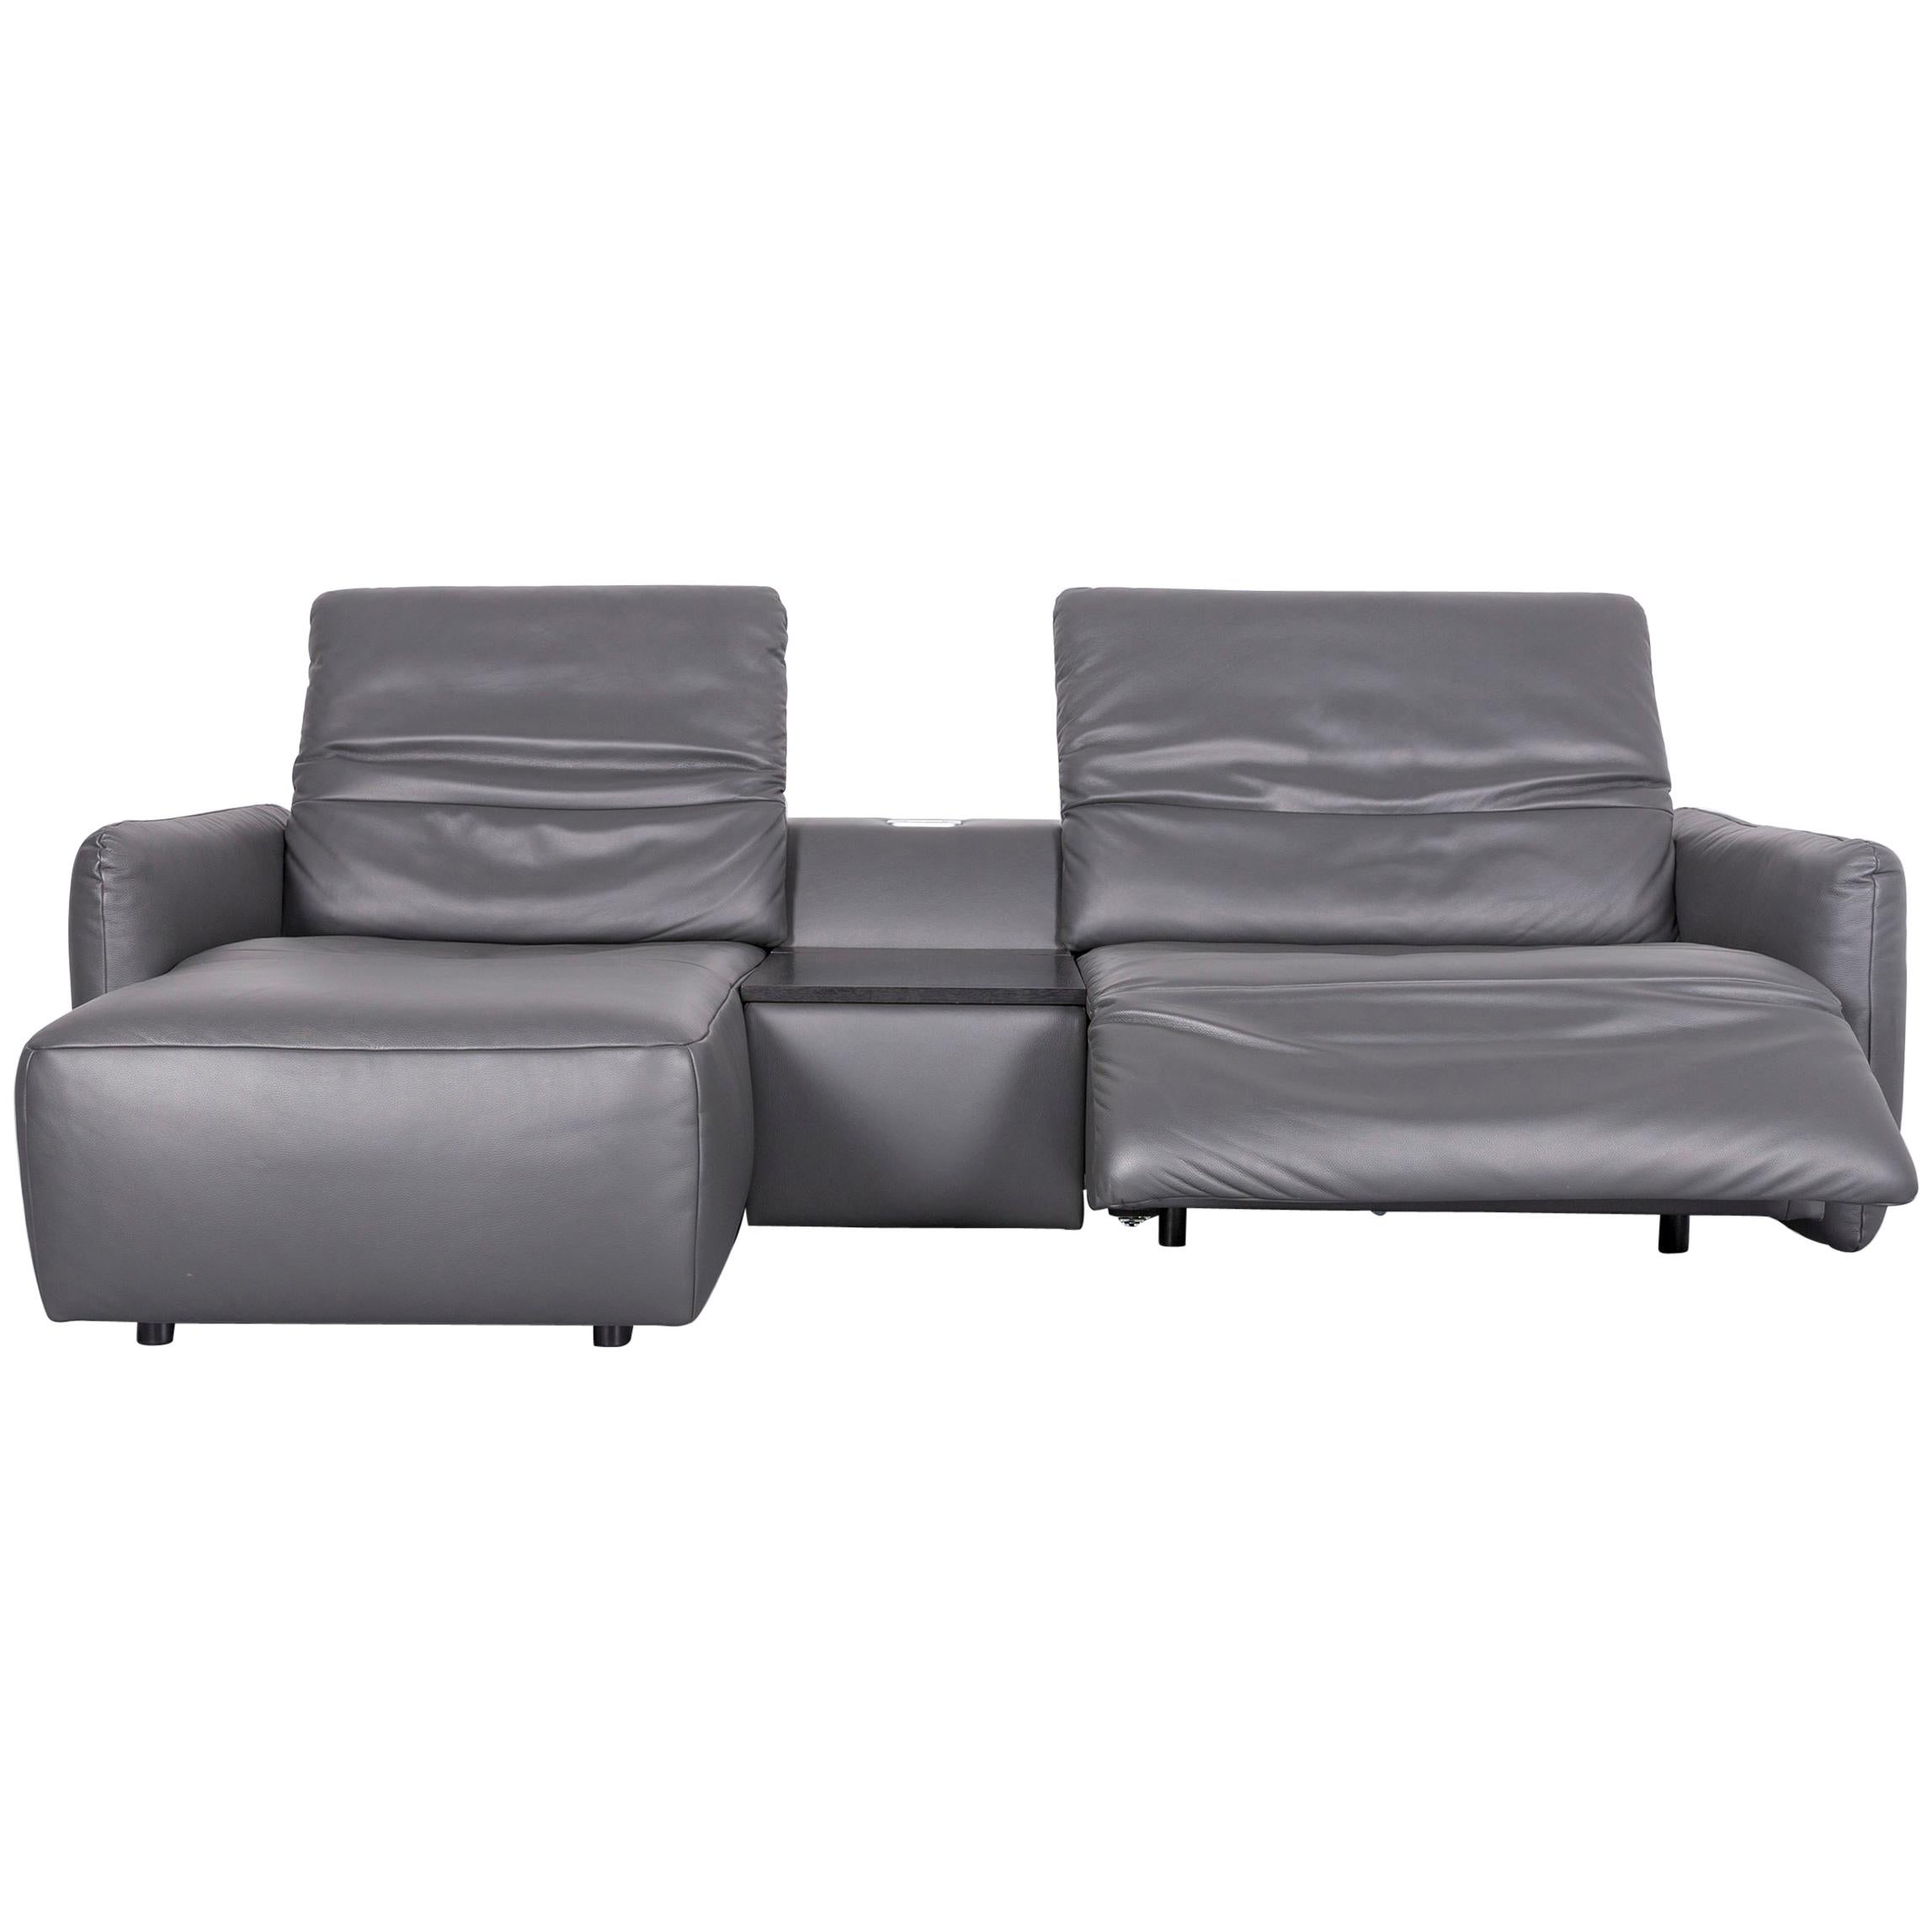 Koinor Alexa Designer Leather Sofa Grey Two-Seat Couch Recliner For Sale